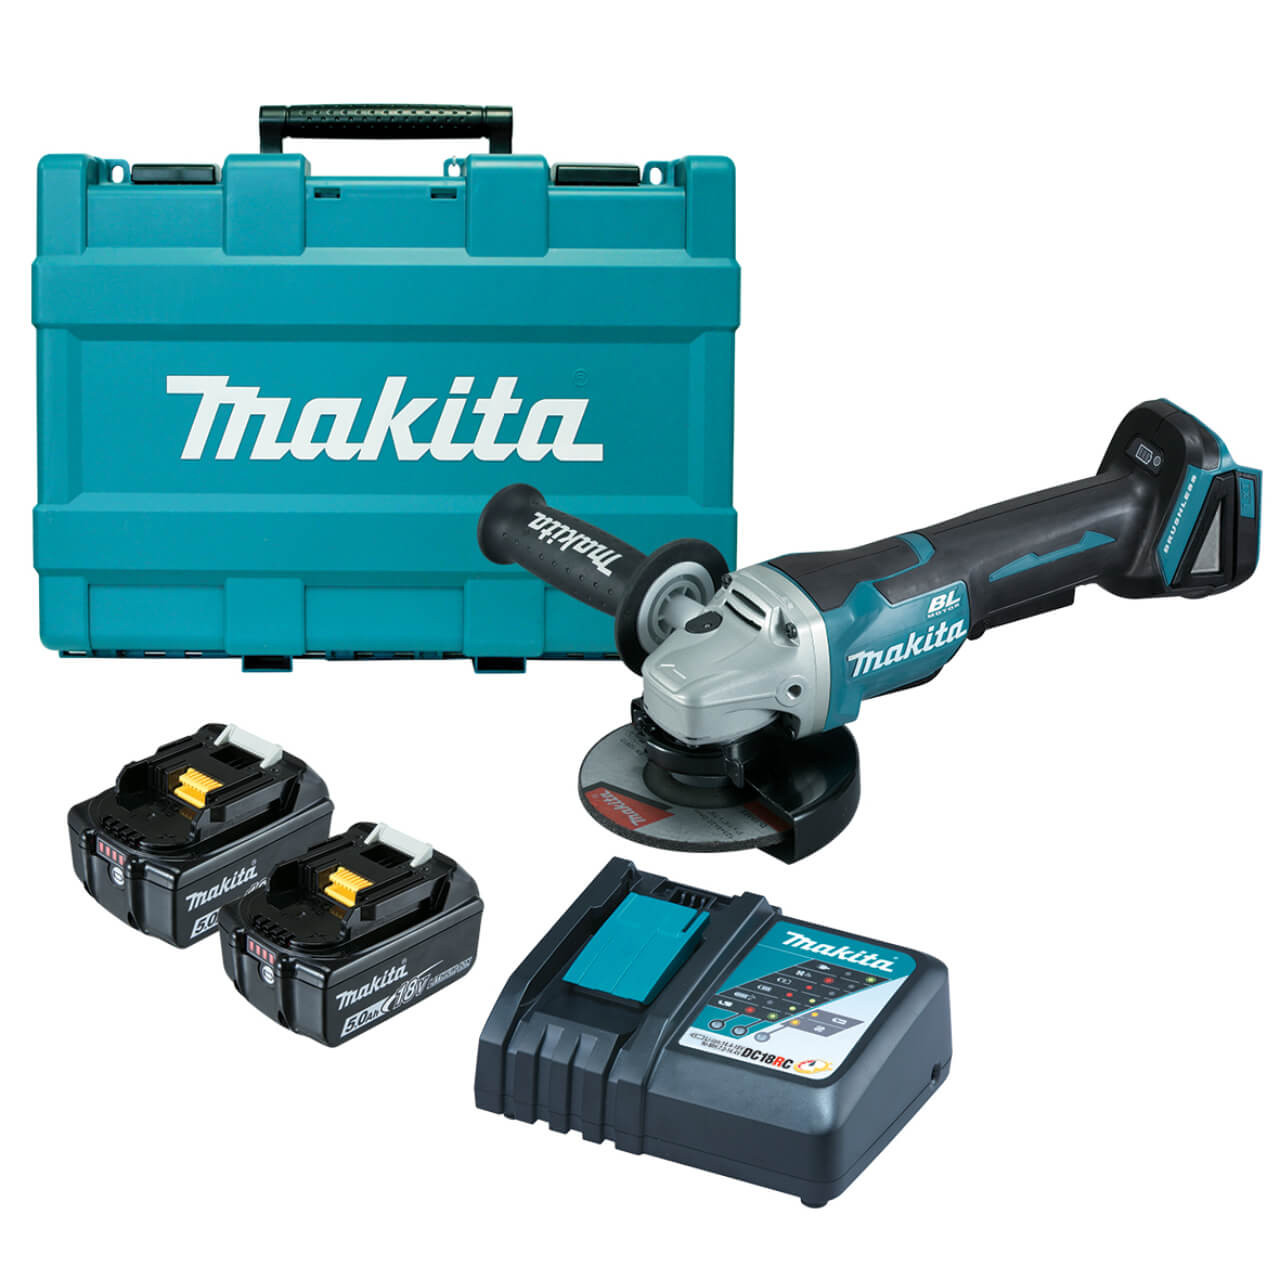 Makita 18V BRUSHLESS 125mm Paddle Switch Angle Grinder Kit - Includes 2 x 5.0Ah Batteries. Rapid Charger & Carry Case